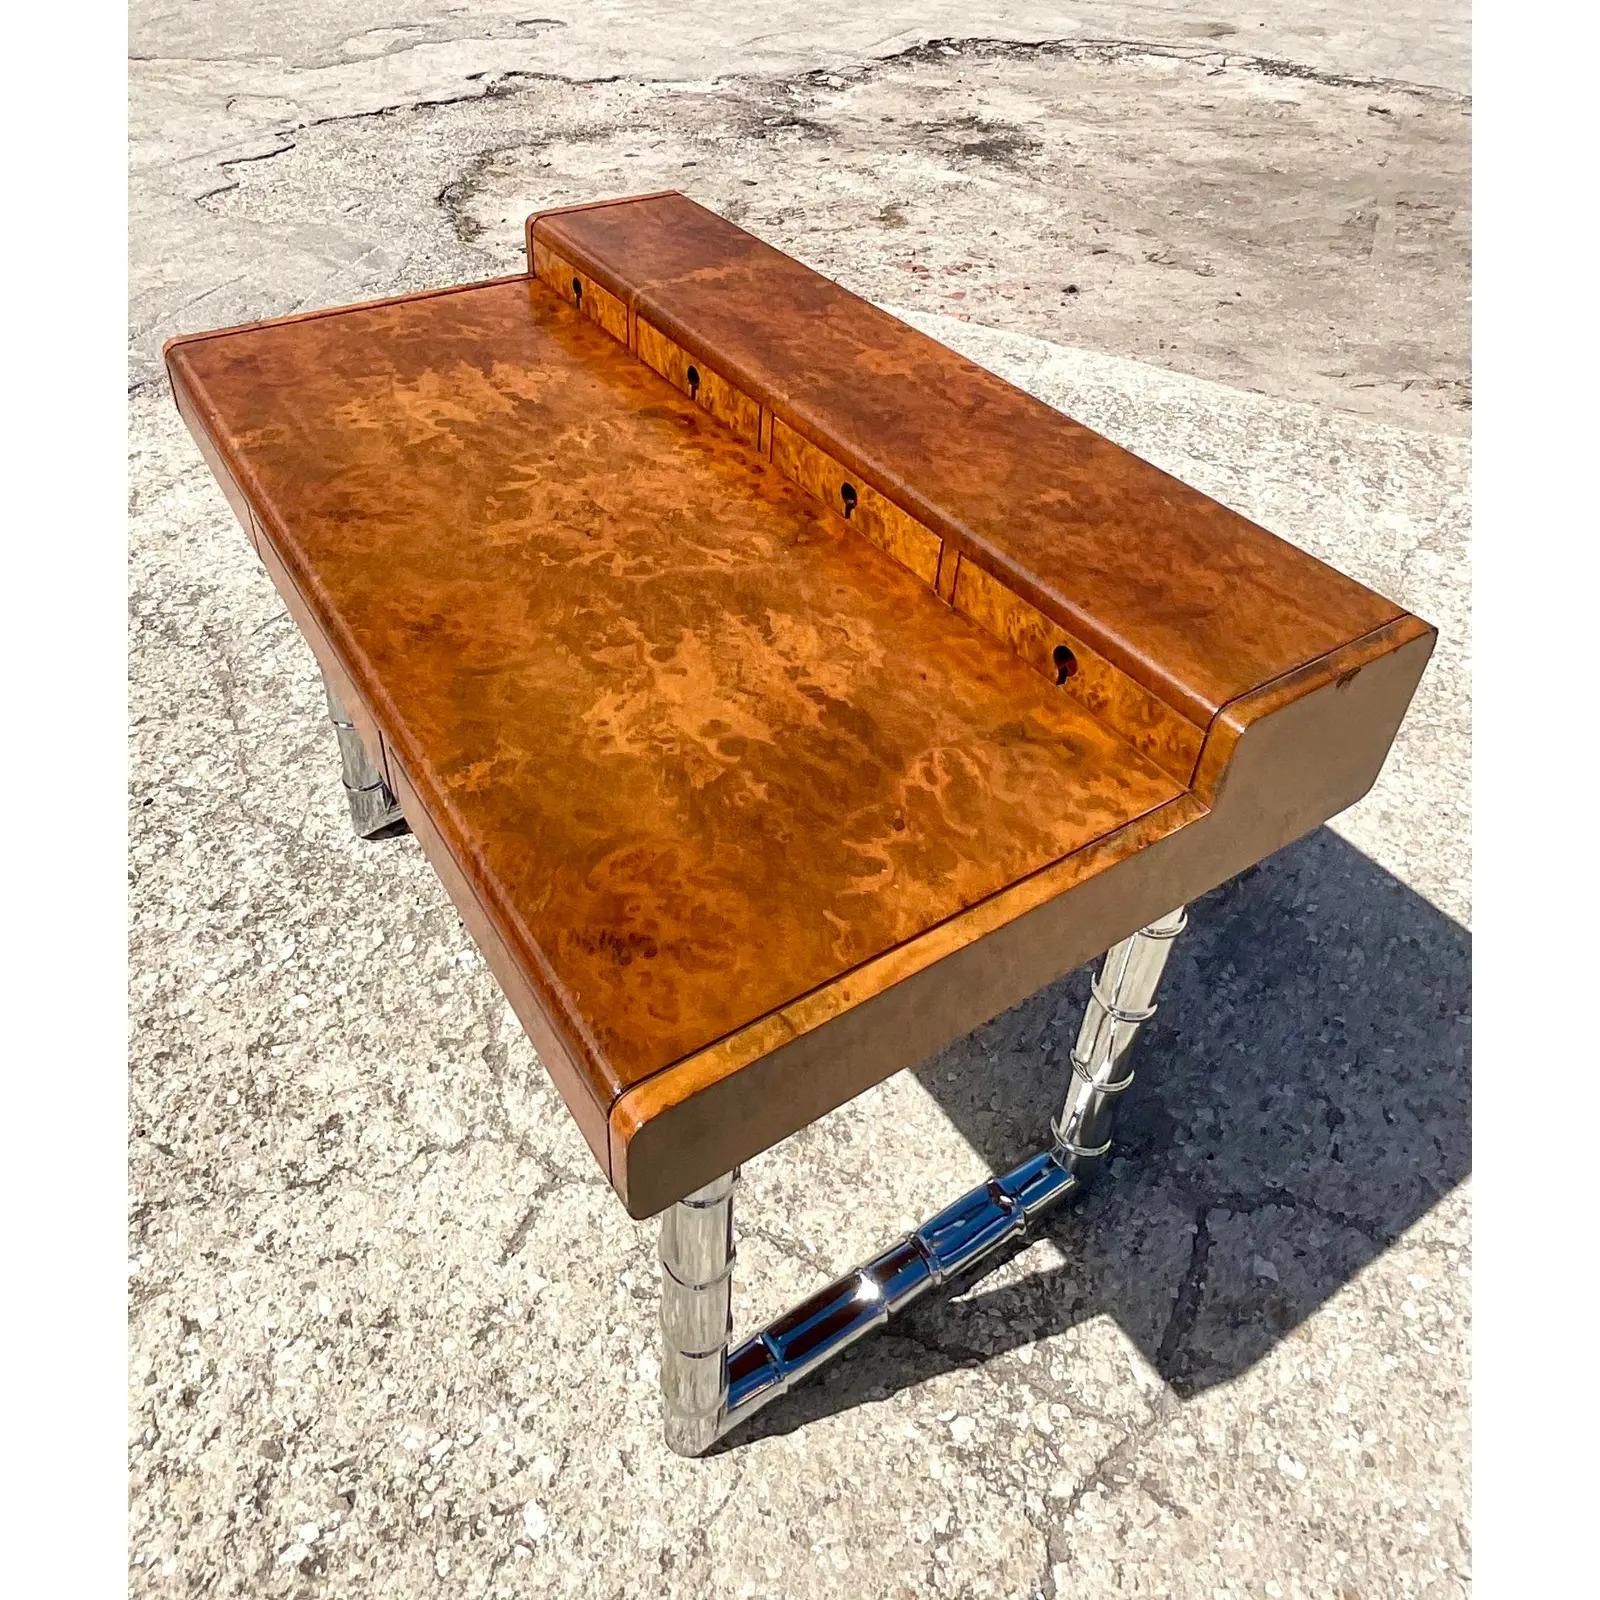 An exceptional vintage Burl wood desk. Gorgeous Italian design with numbered drawers and inset drawer pulls. Chic chrome bamboo legs. A real showstopper. Acquired from a Palm Beach estate.